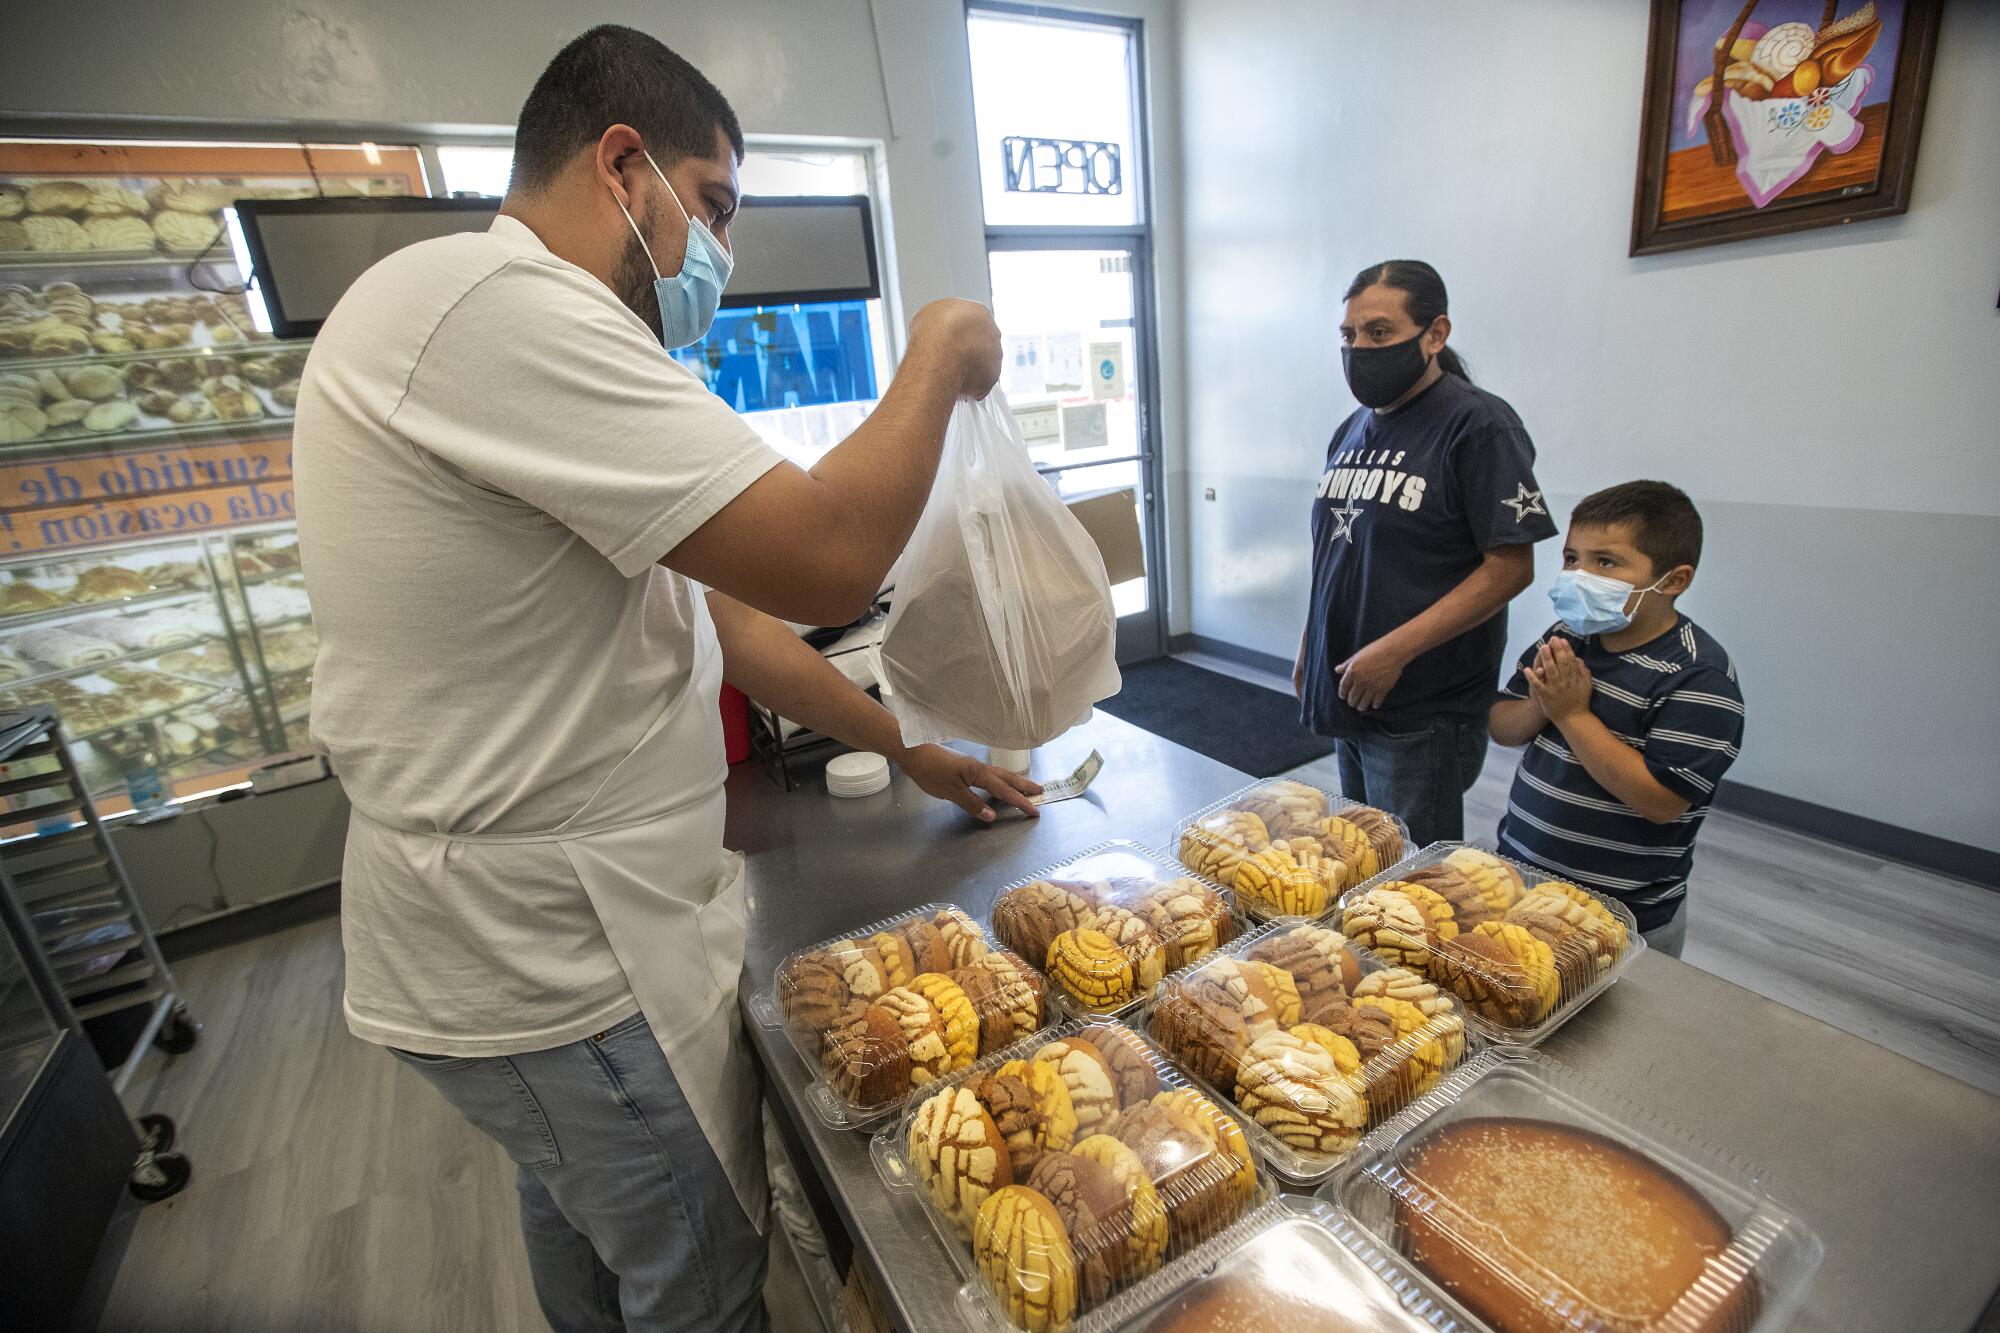 Jesse Dominguez prepares to hand a bag of fresh baked bolillos to customer Genaro Galindo, with his nephew, Dylan Arreola, 5.